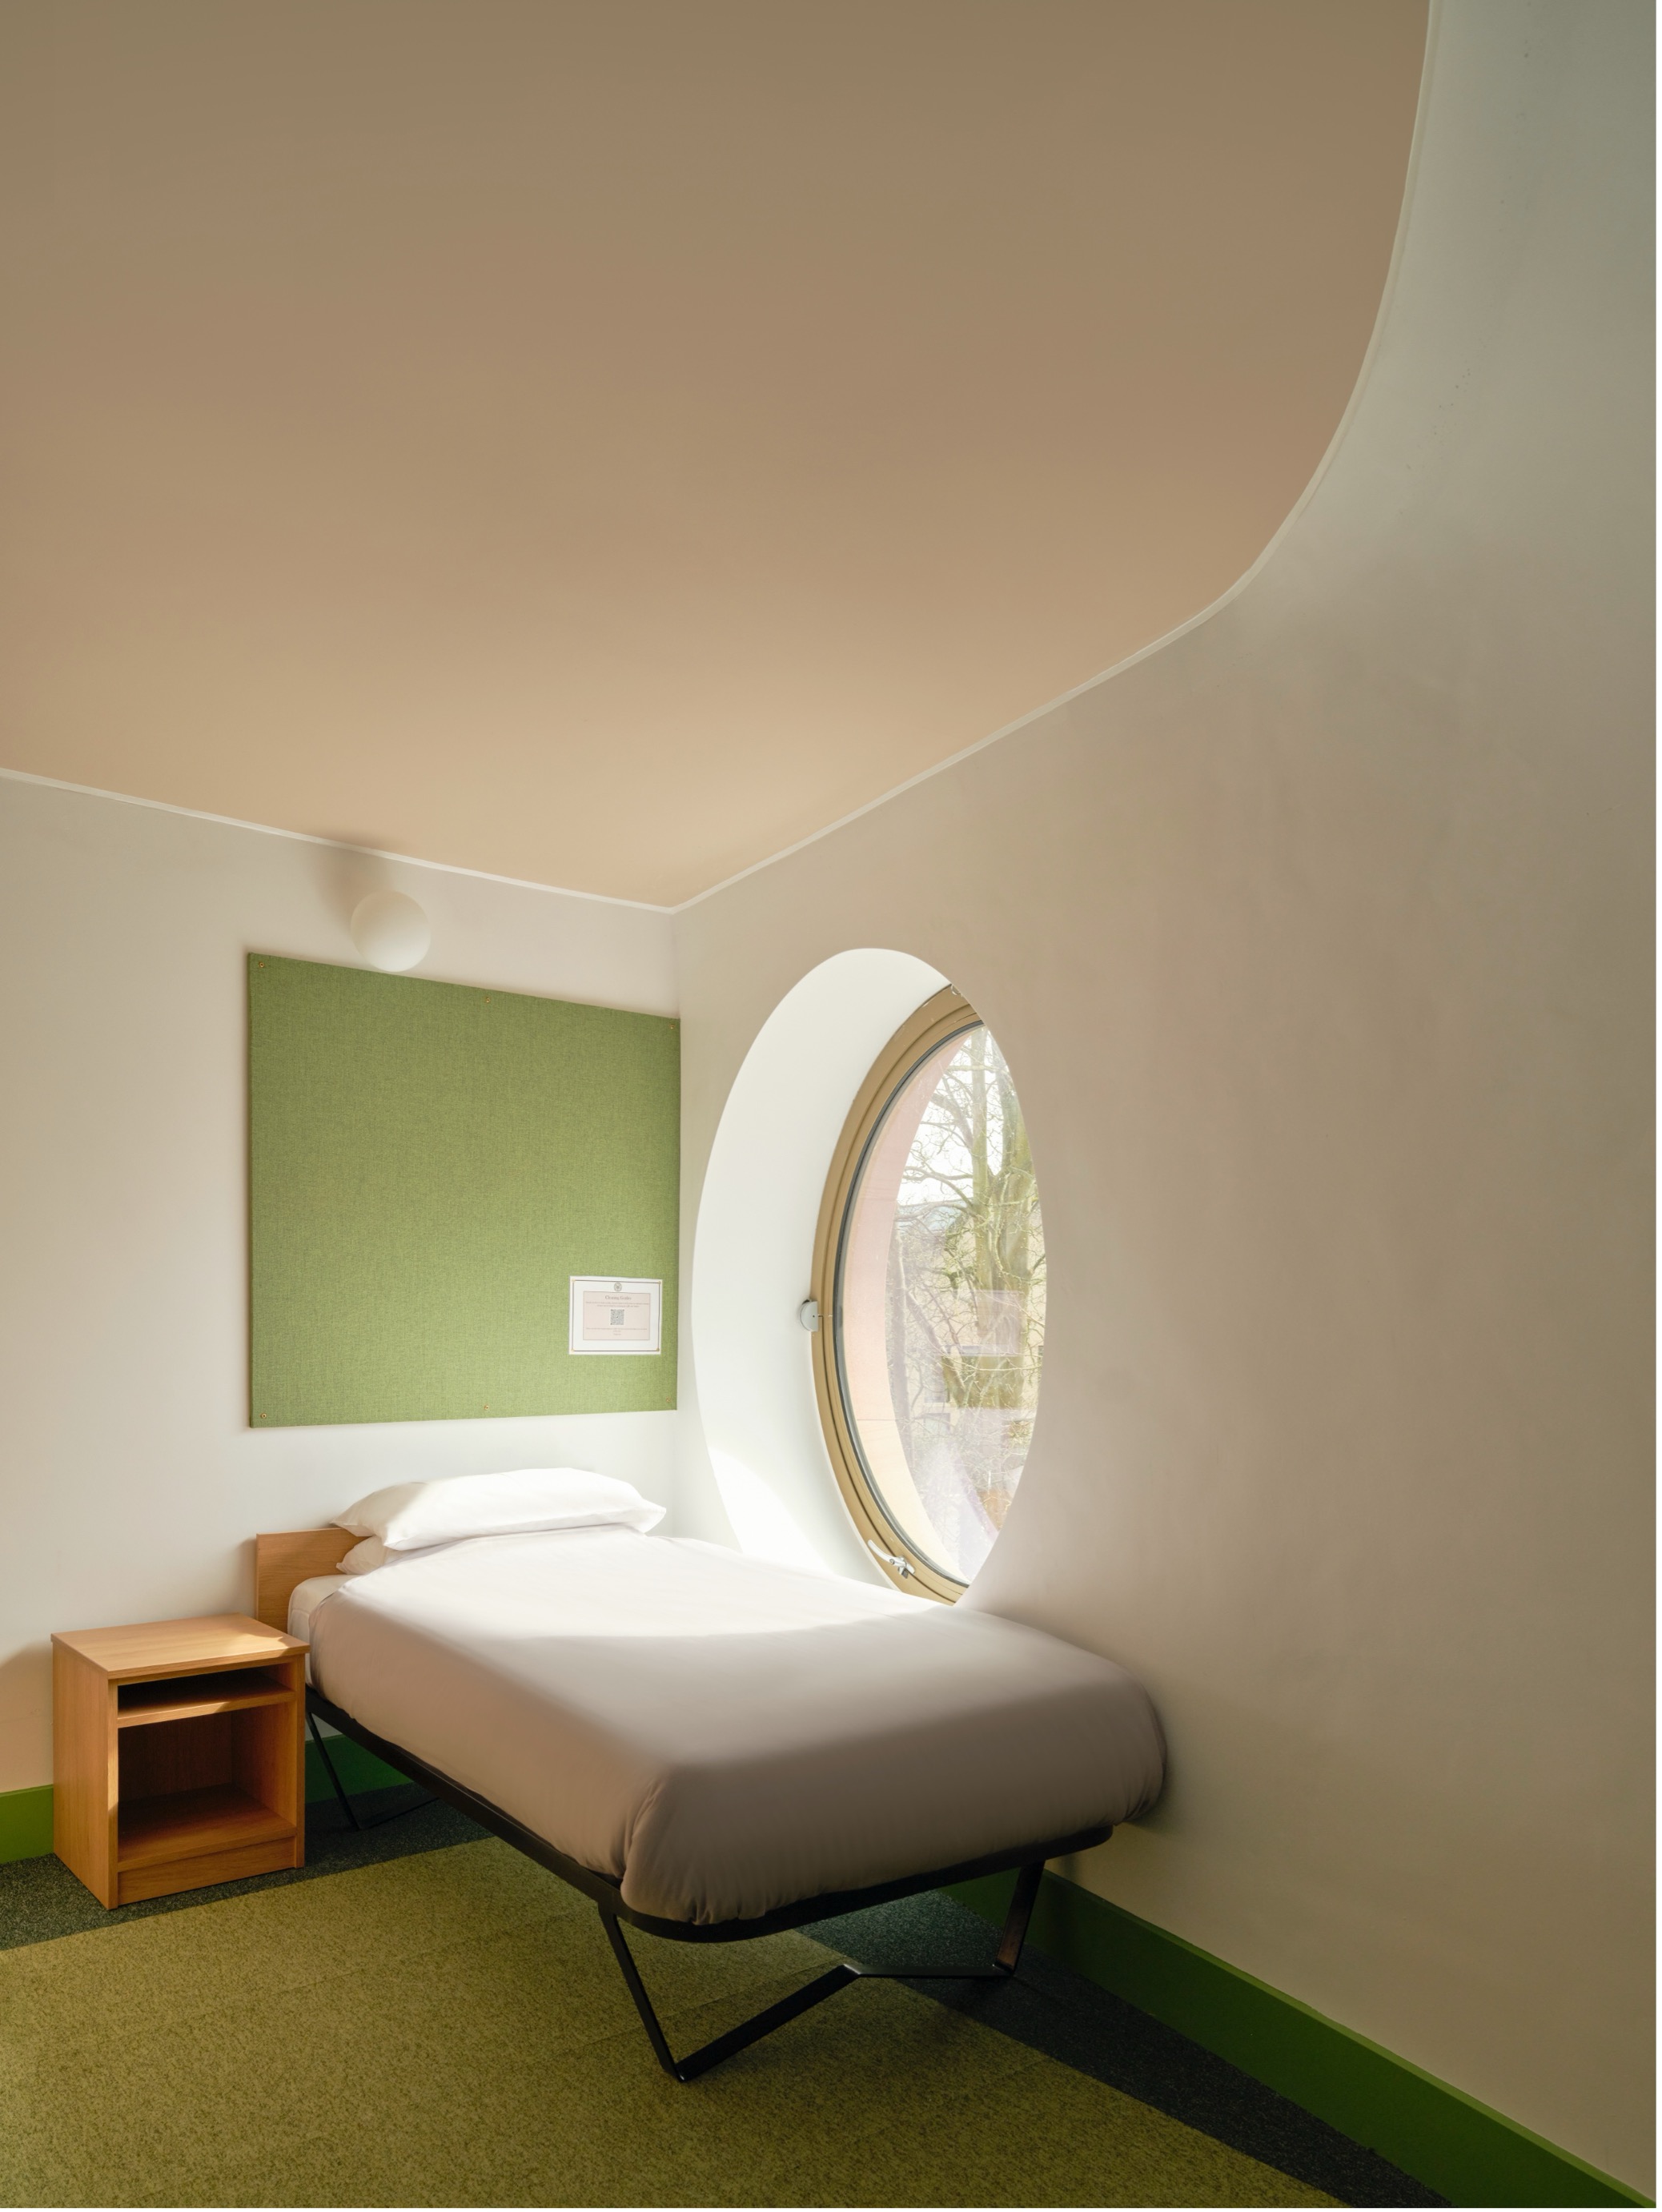 Gradel bedroom with circular window and single bed